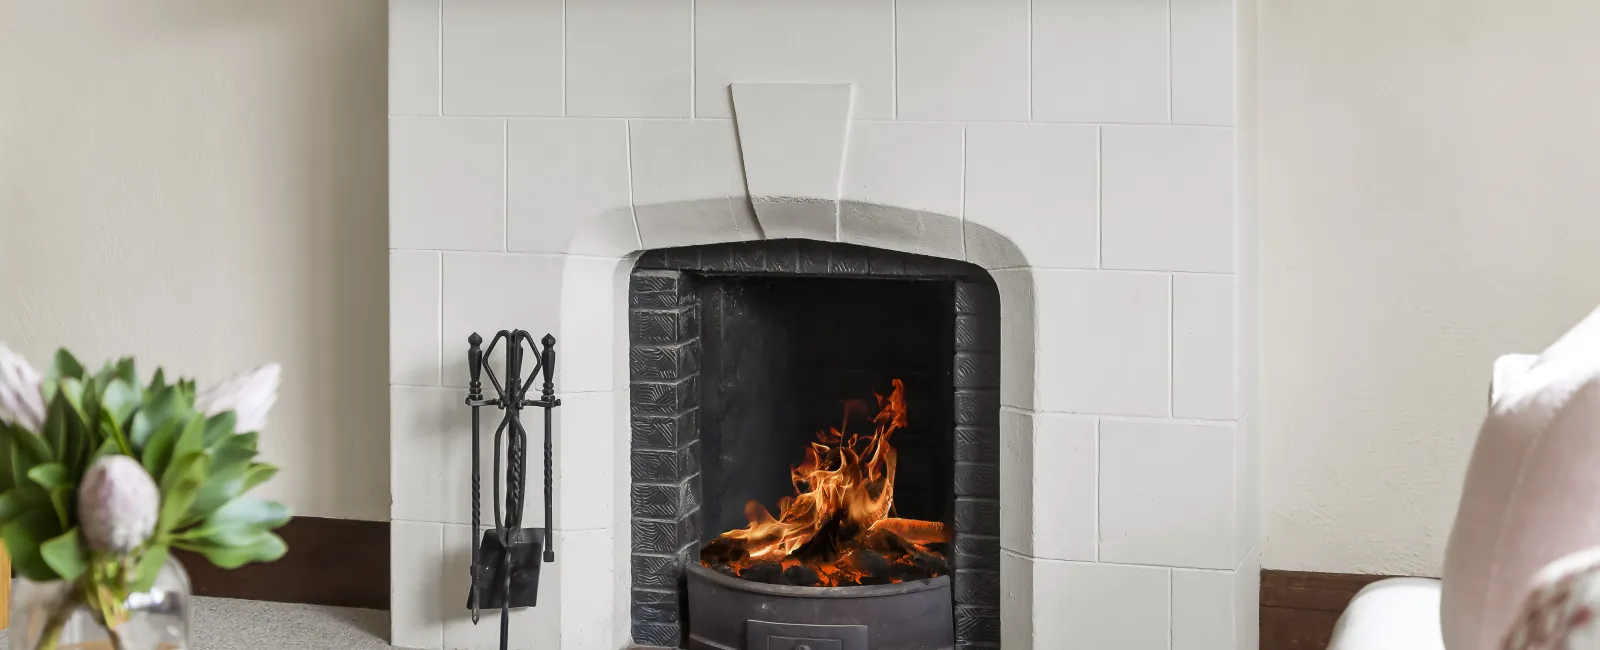 Fireplace Safety Tips for The Winter Time